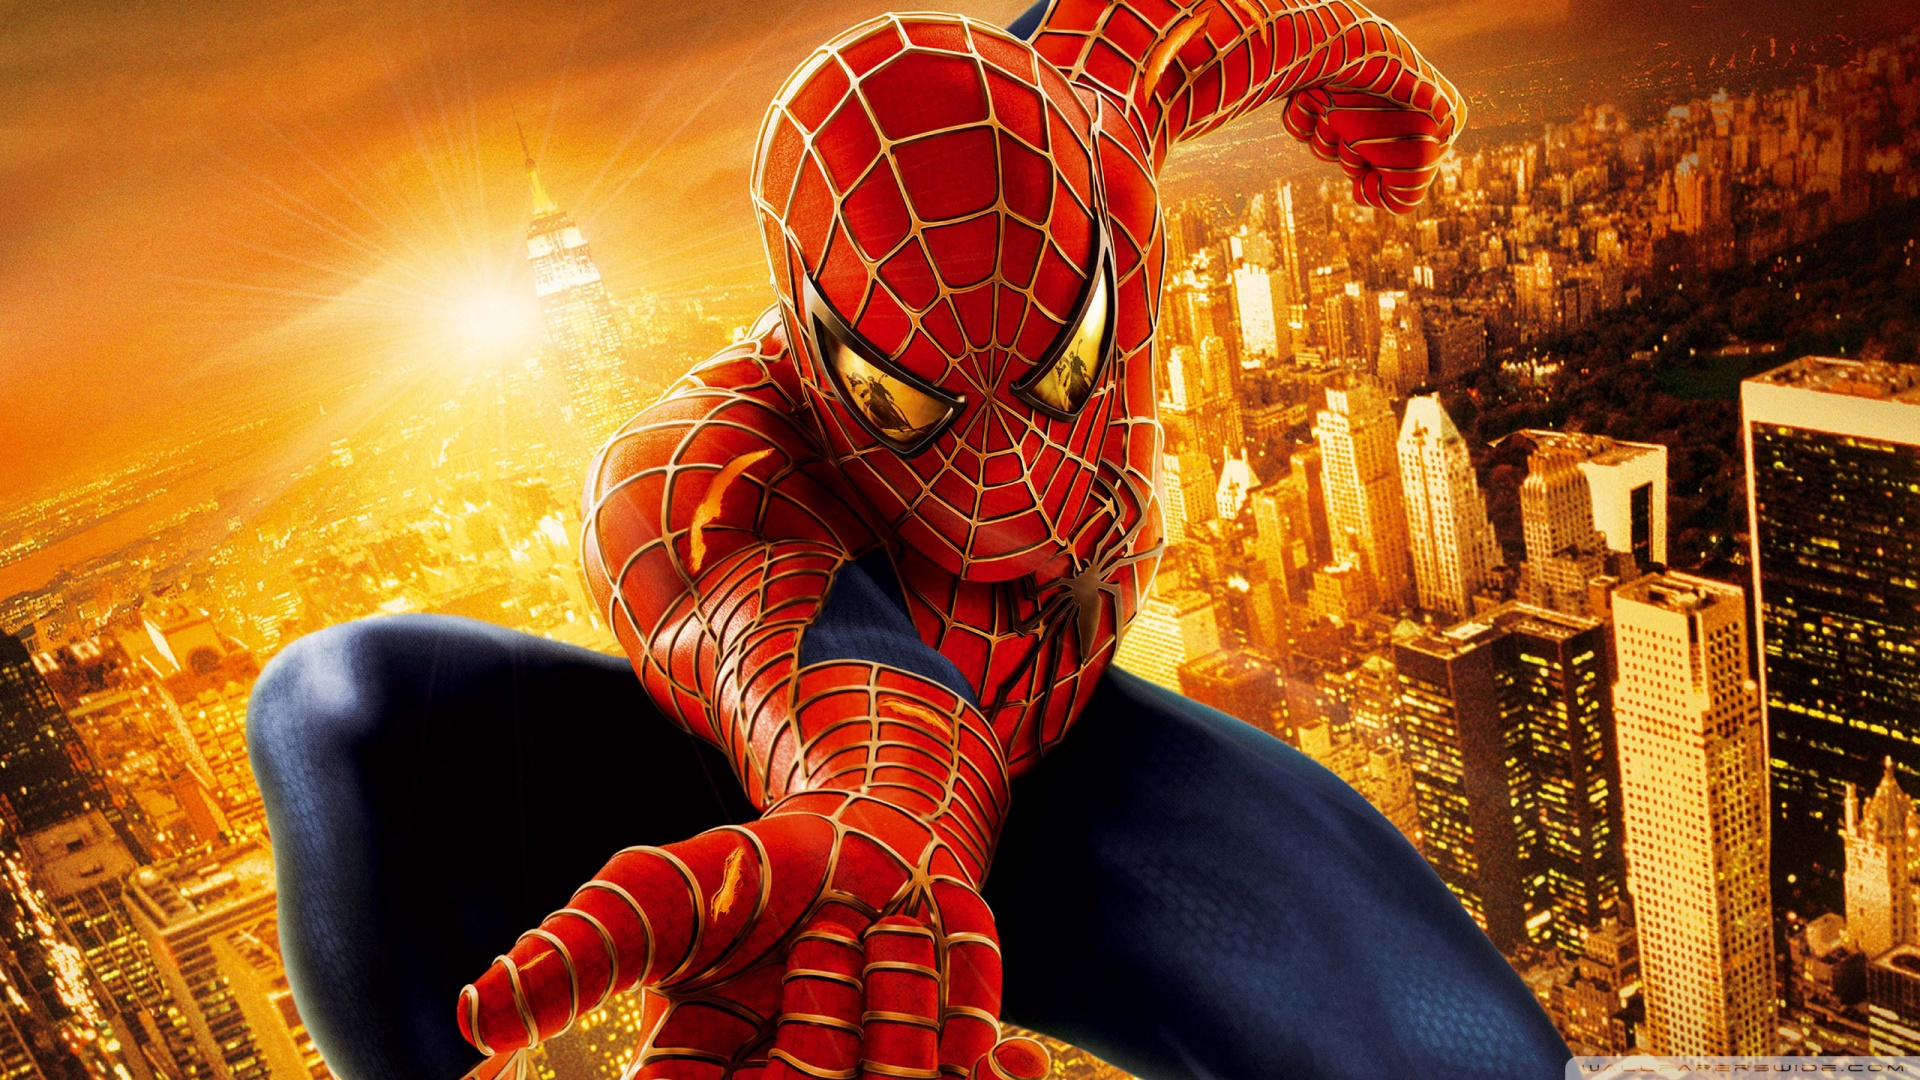 spiderman wallpapers photos 4k for download｜TikTok Search